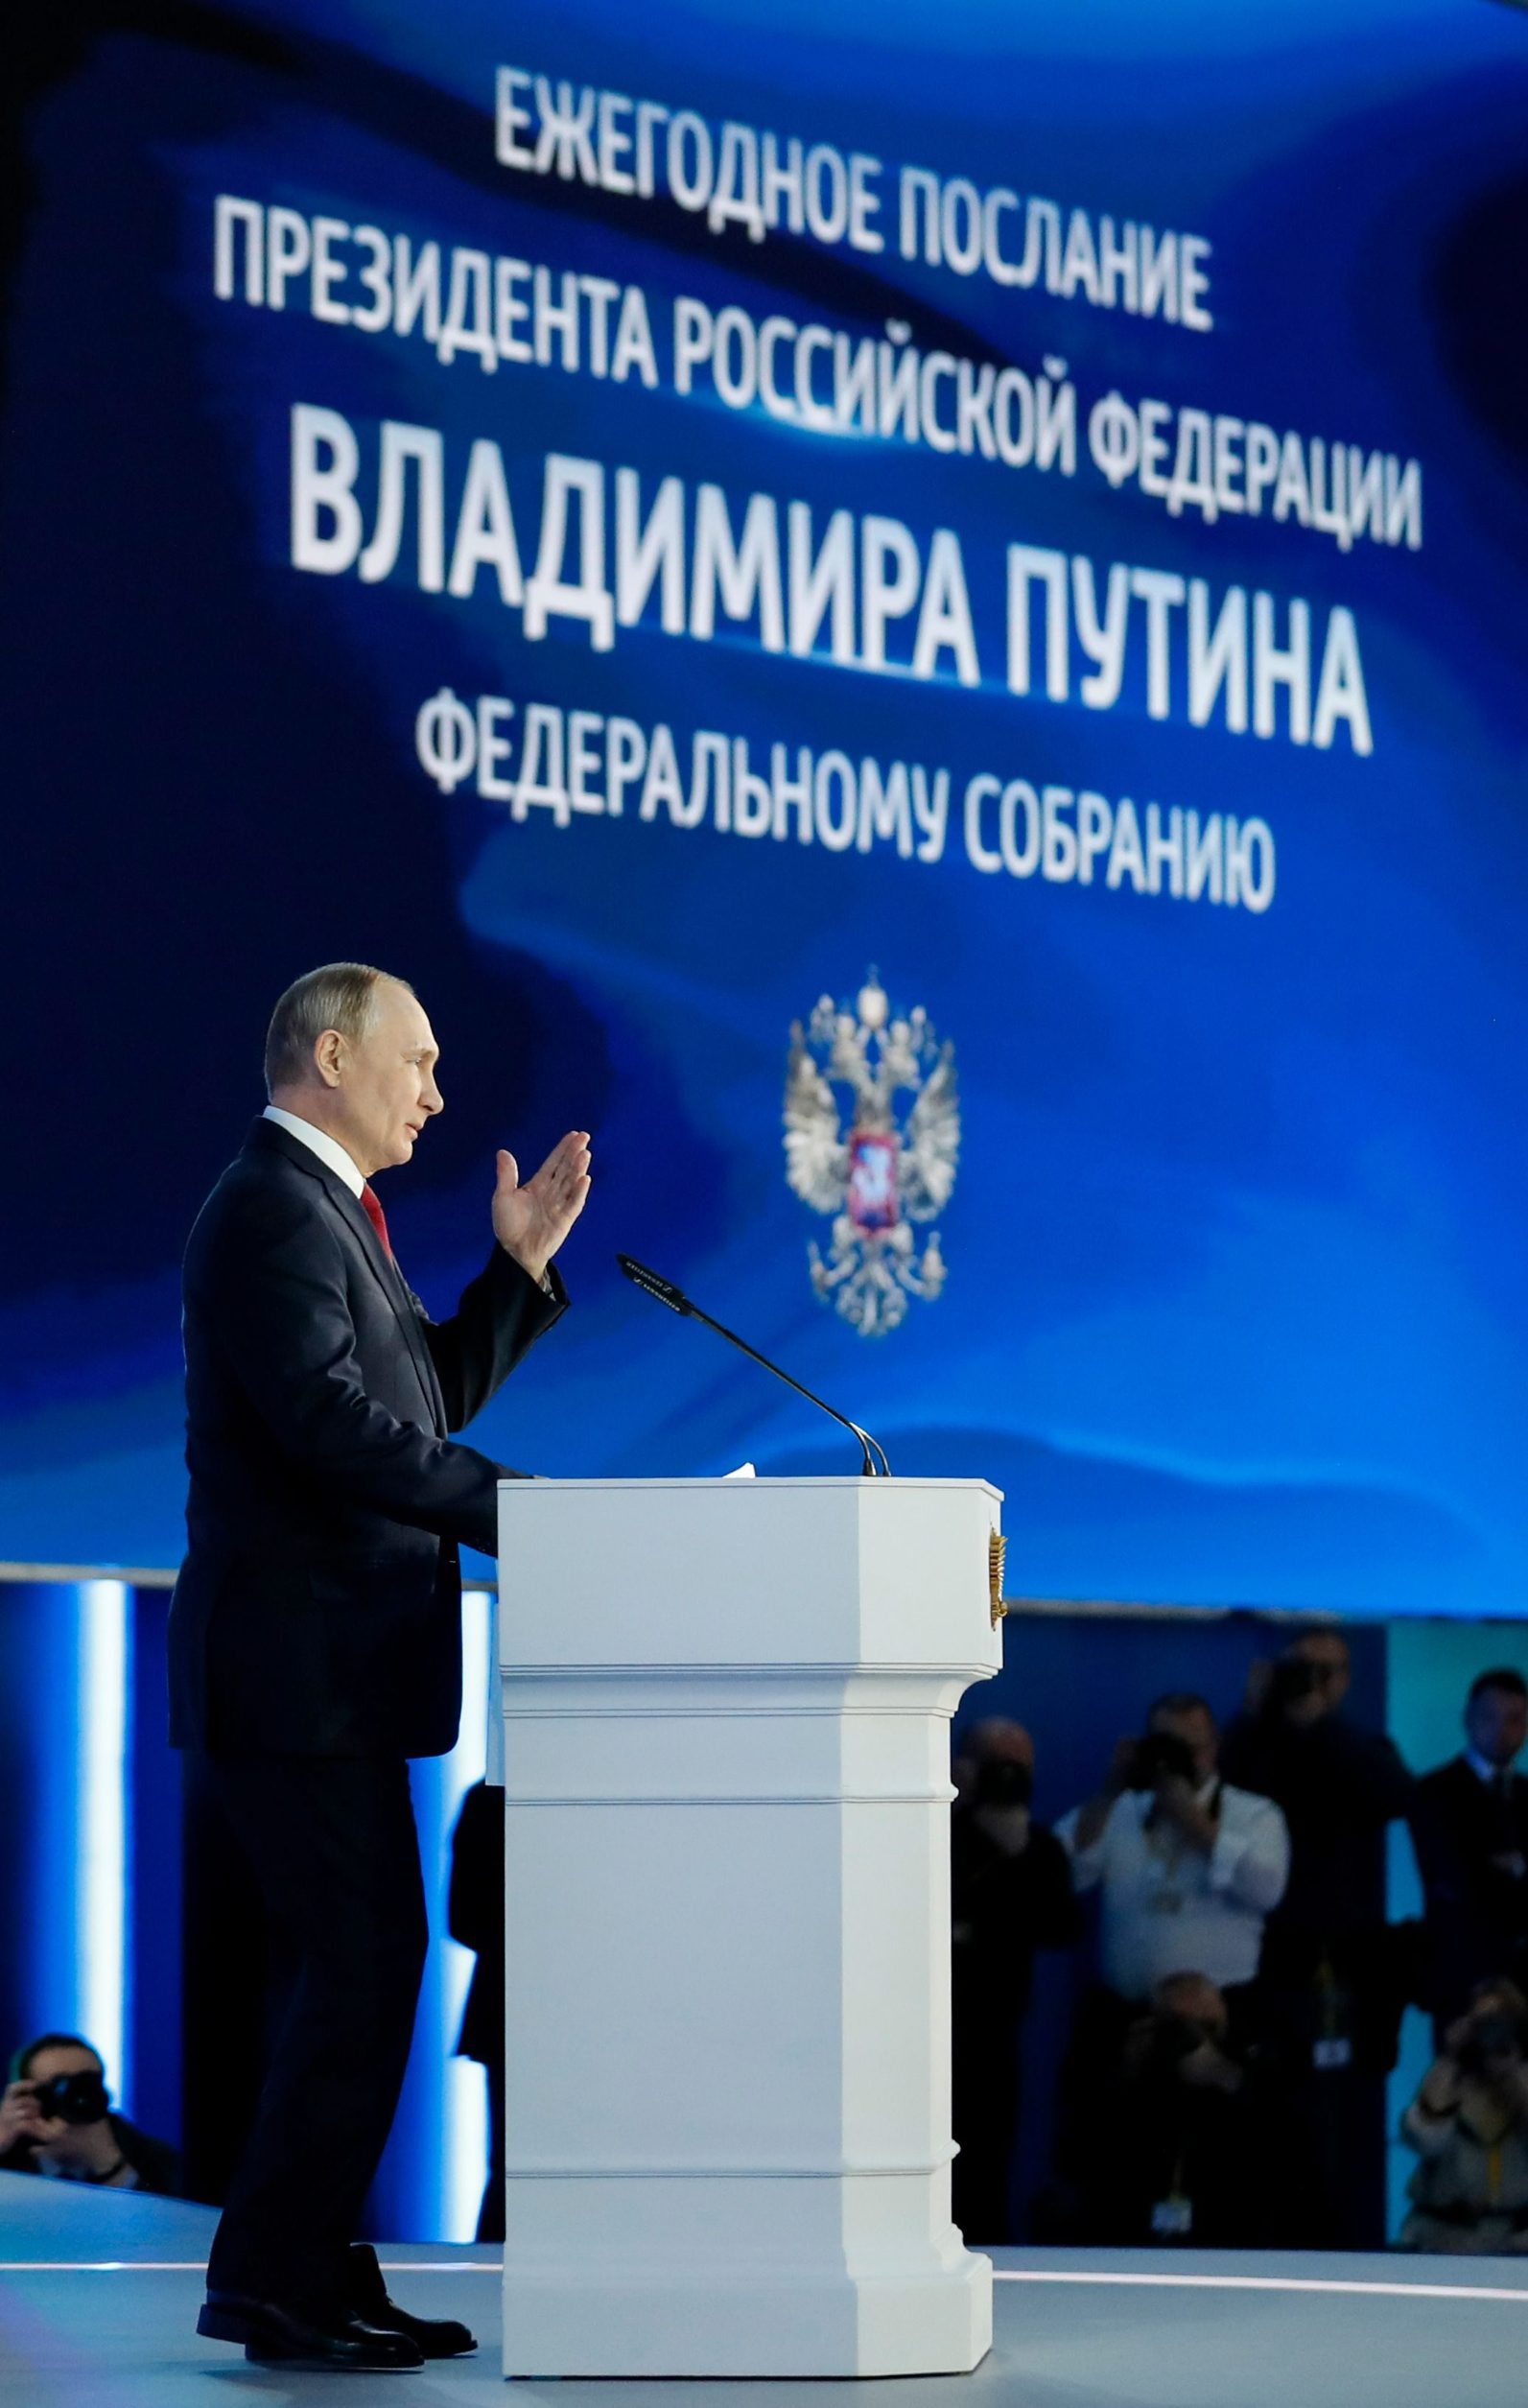 Russian President Vladimir Putin addresses the Federal Assembly at the Manezh exhibition hall in downtown Moscow on January 15, 2020. (Photo by Dmitry ASTAKHOV / SPUTNIK / AFP)